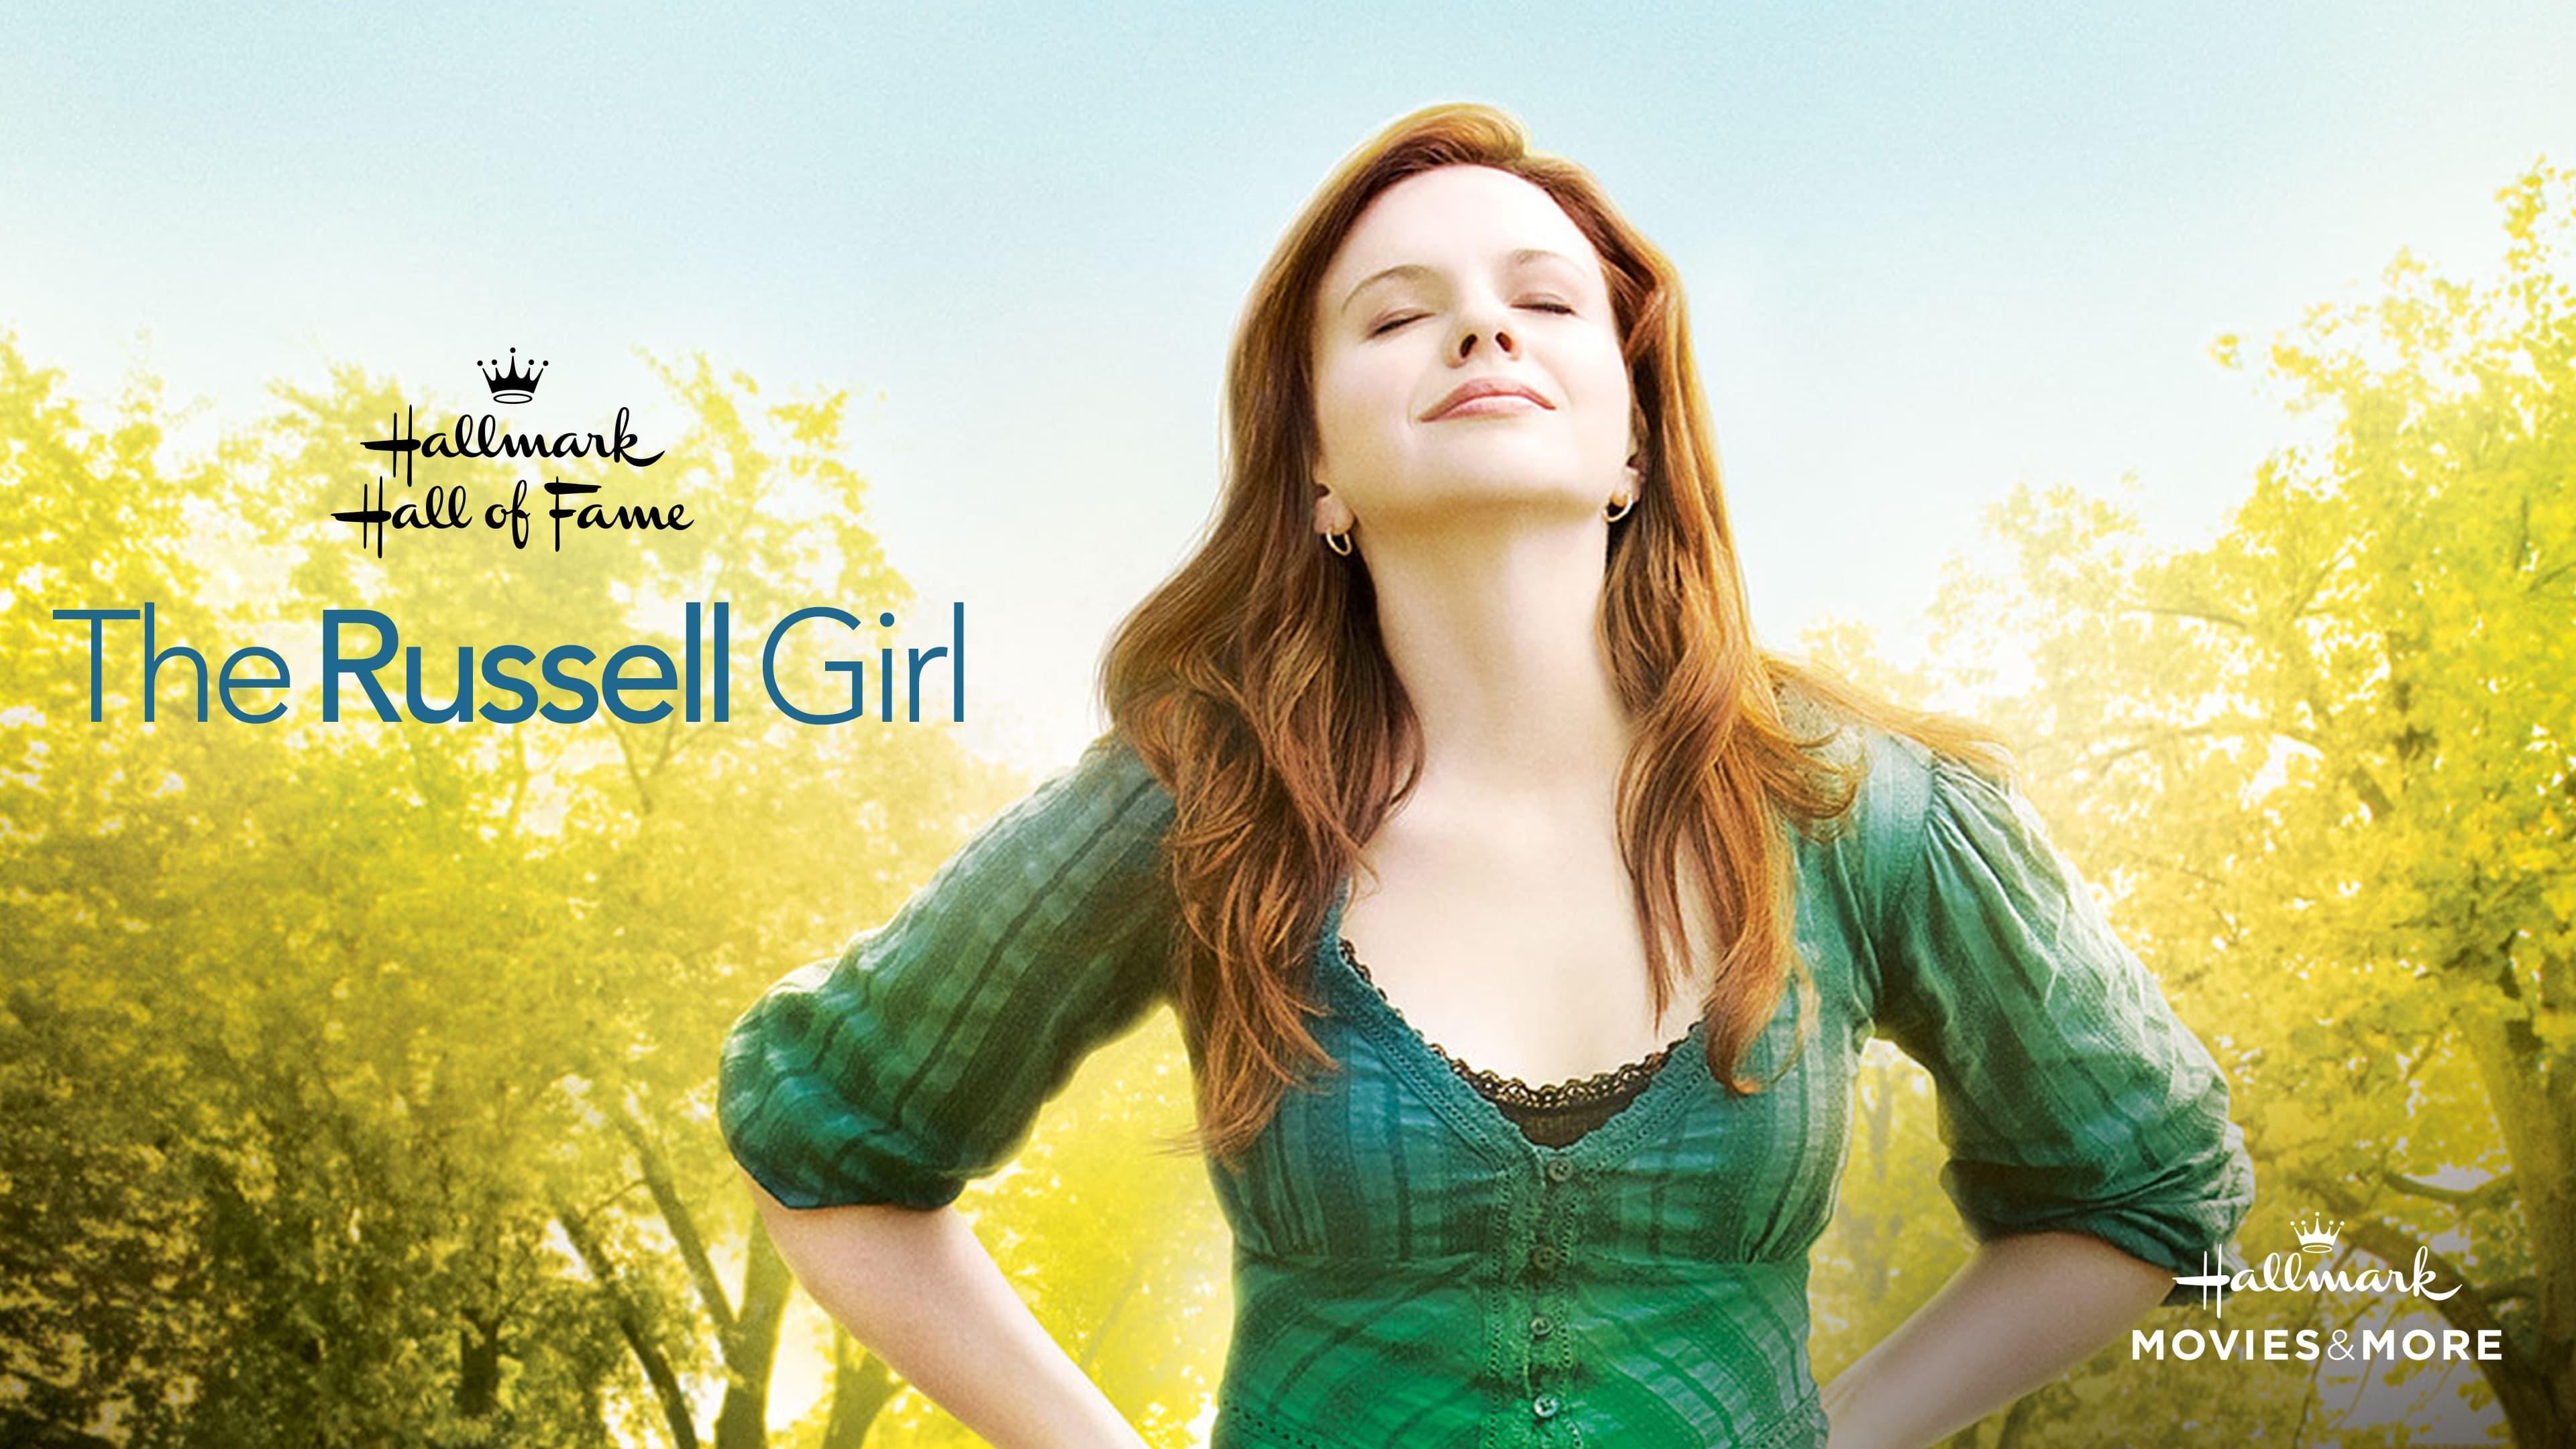 The Russell Girl backdrop